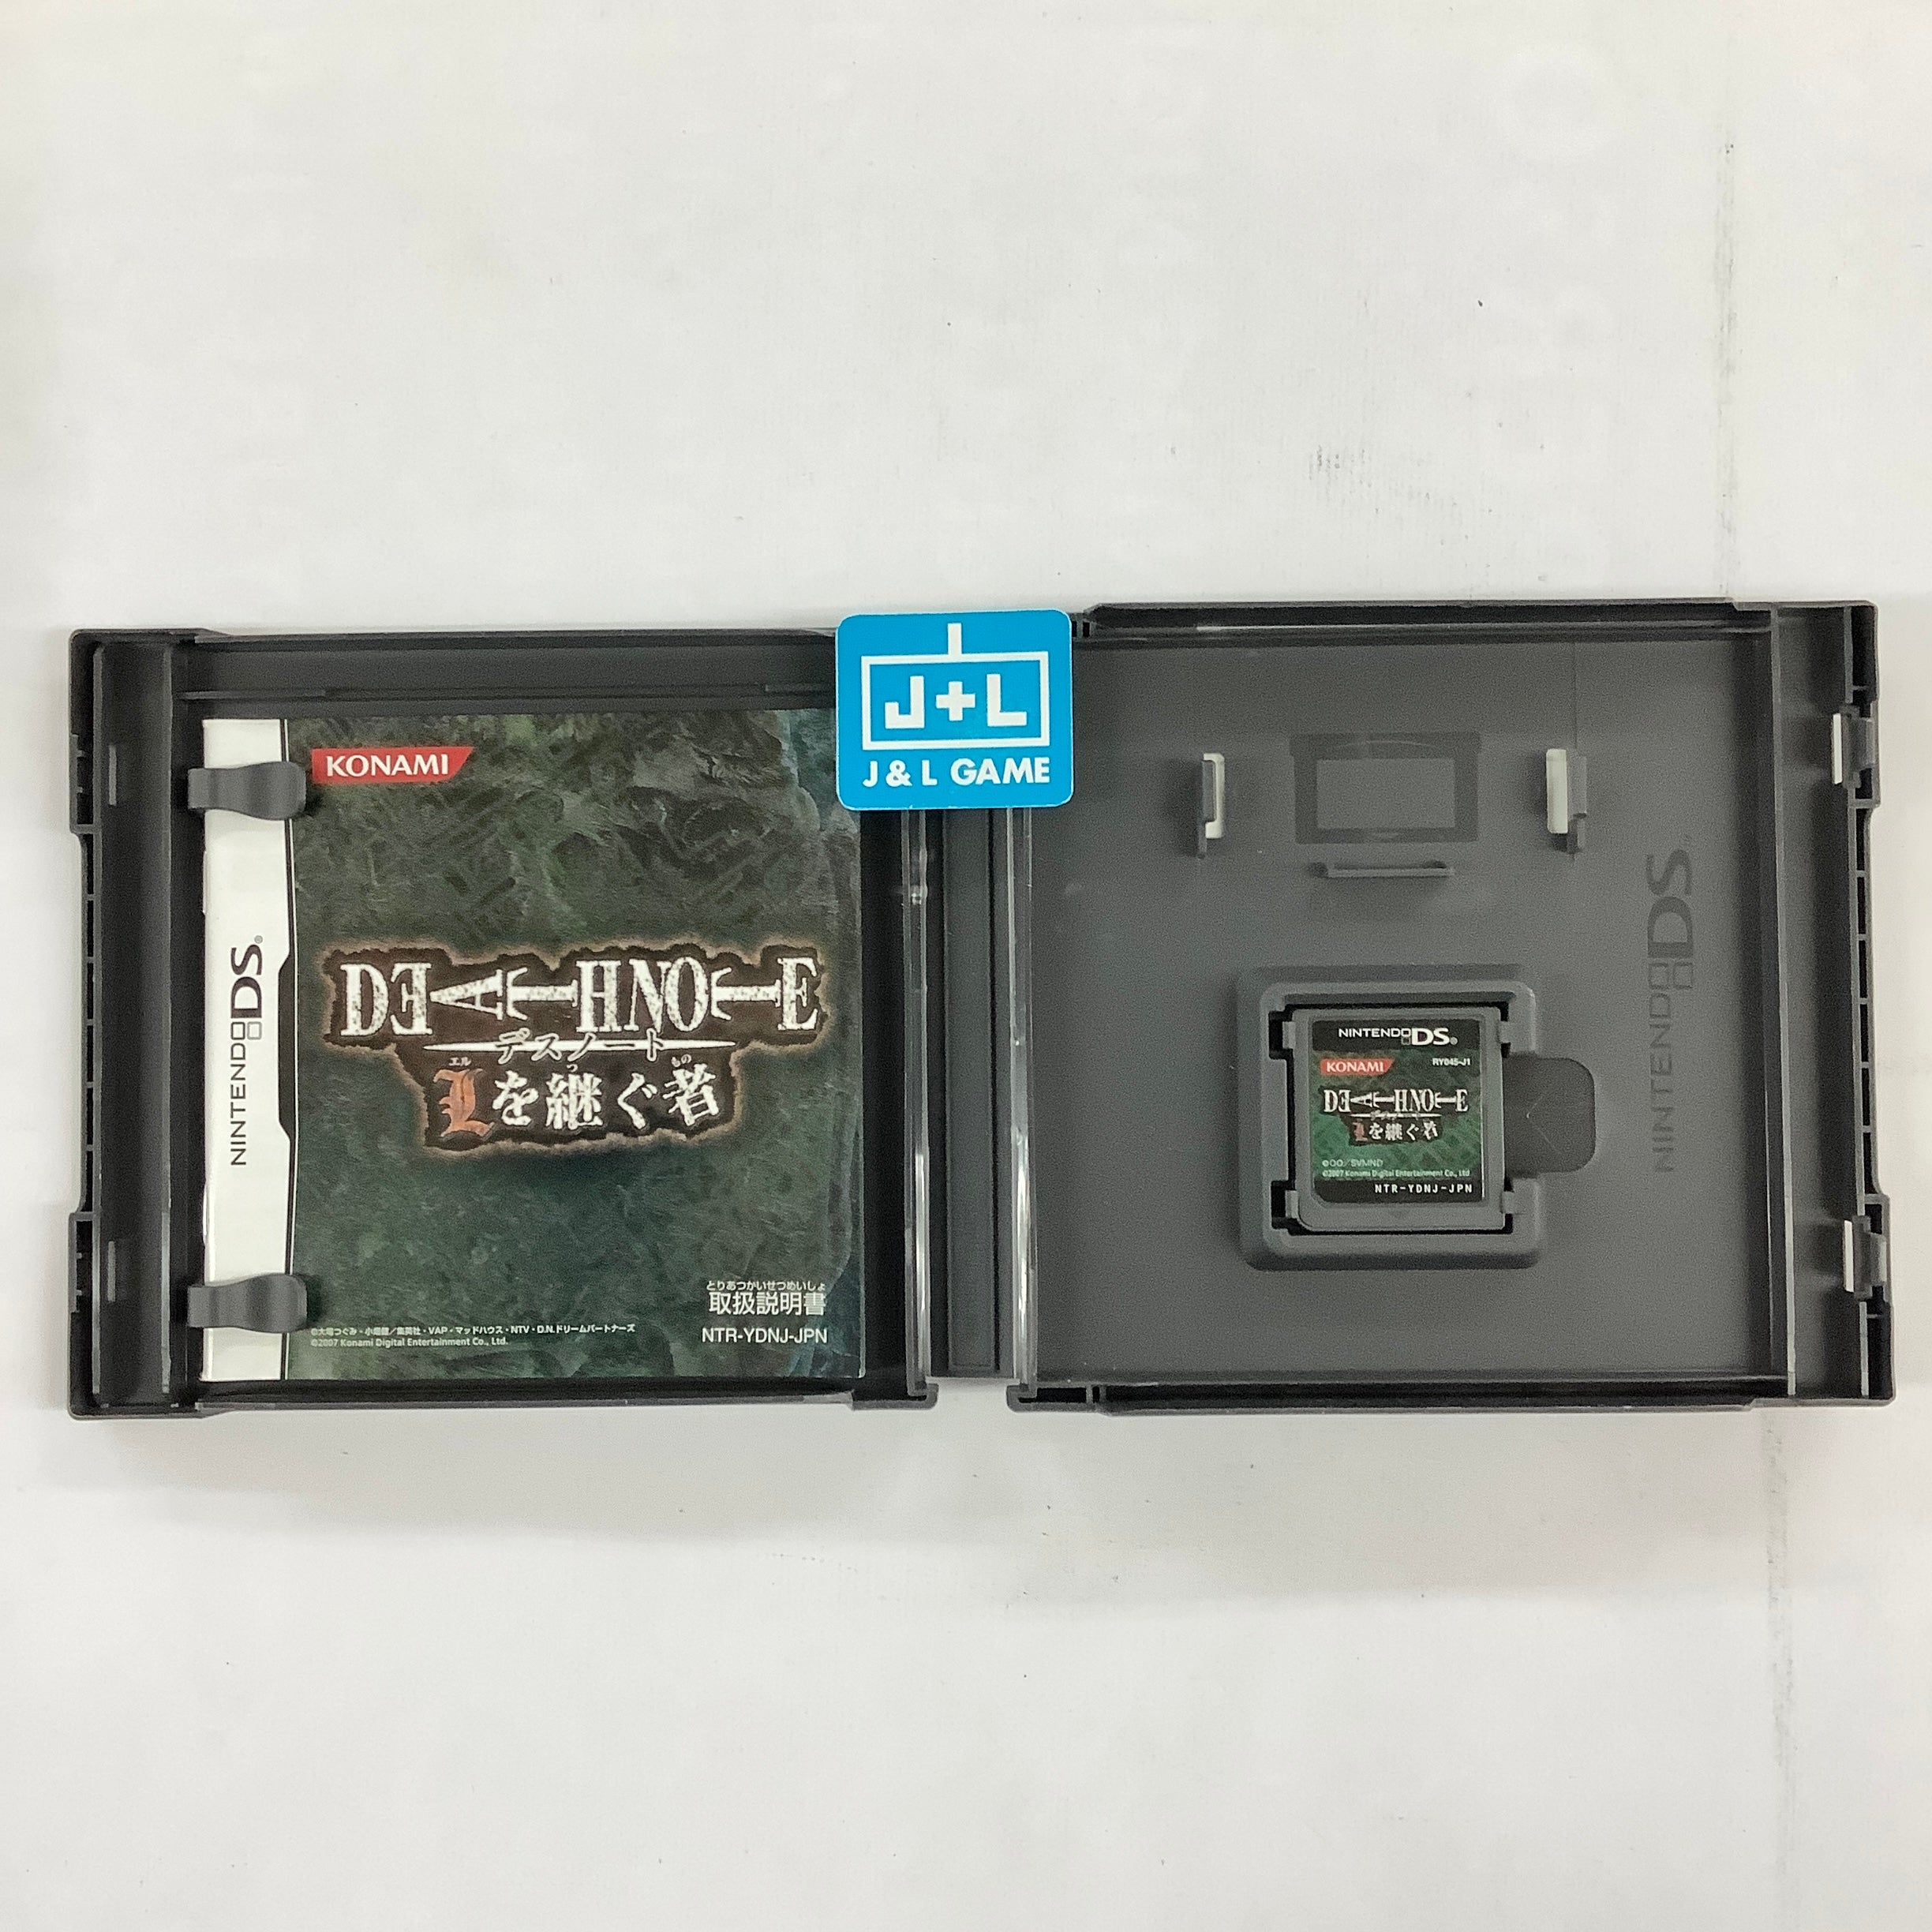 Death Note: L o Tsugu Mono - (NDS) Nintendo DS [Pre-Owned] (Japanese Import) Video Games Konami   